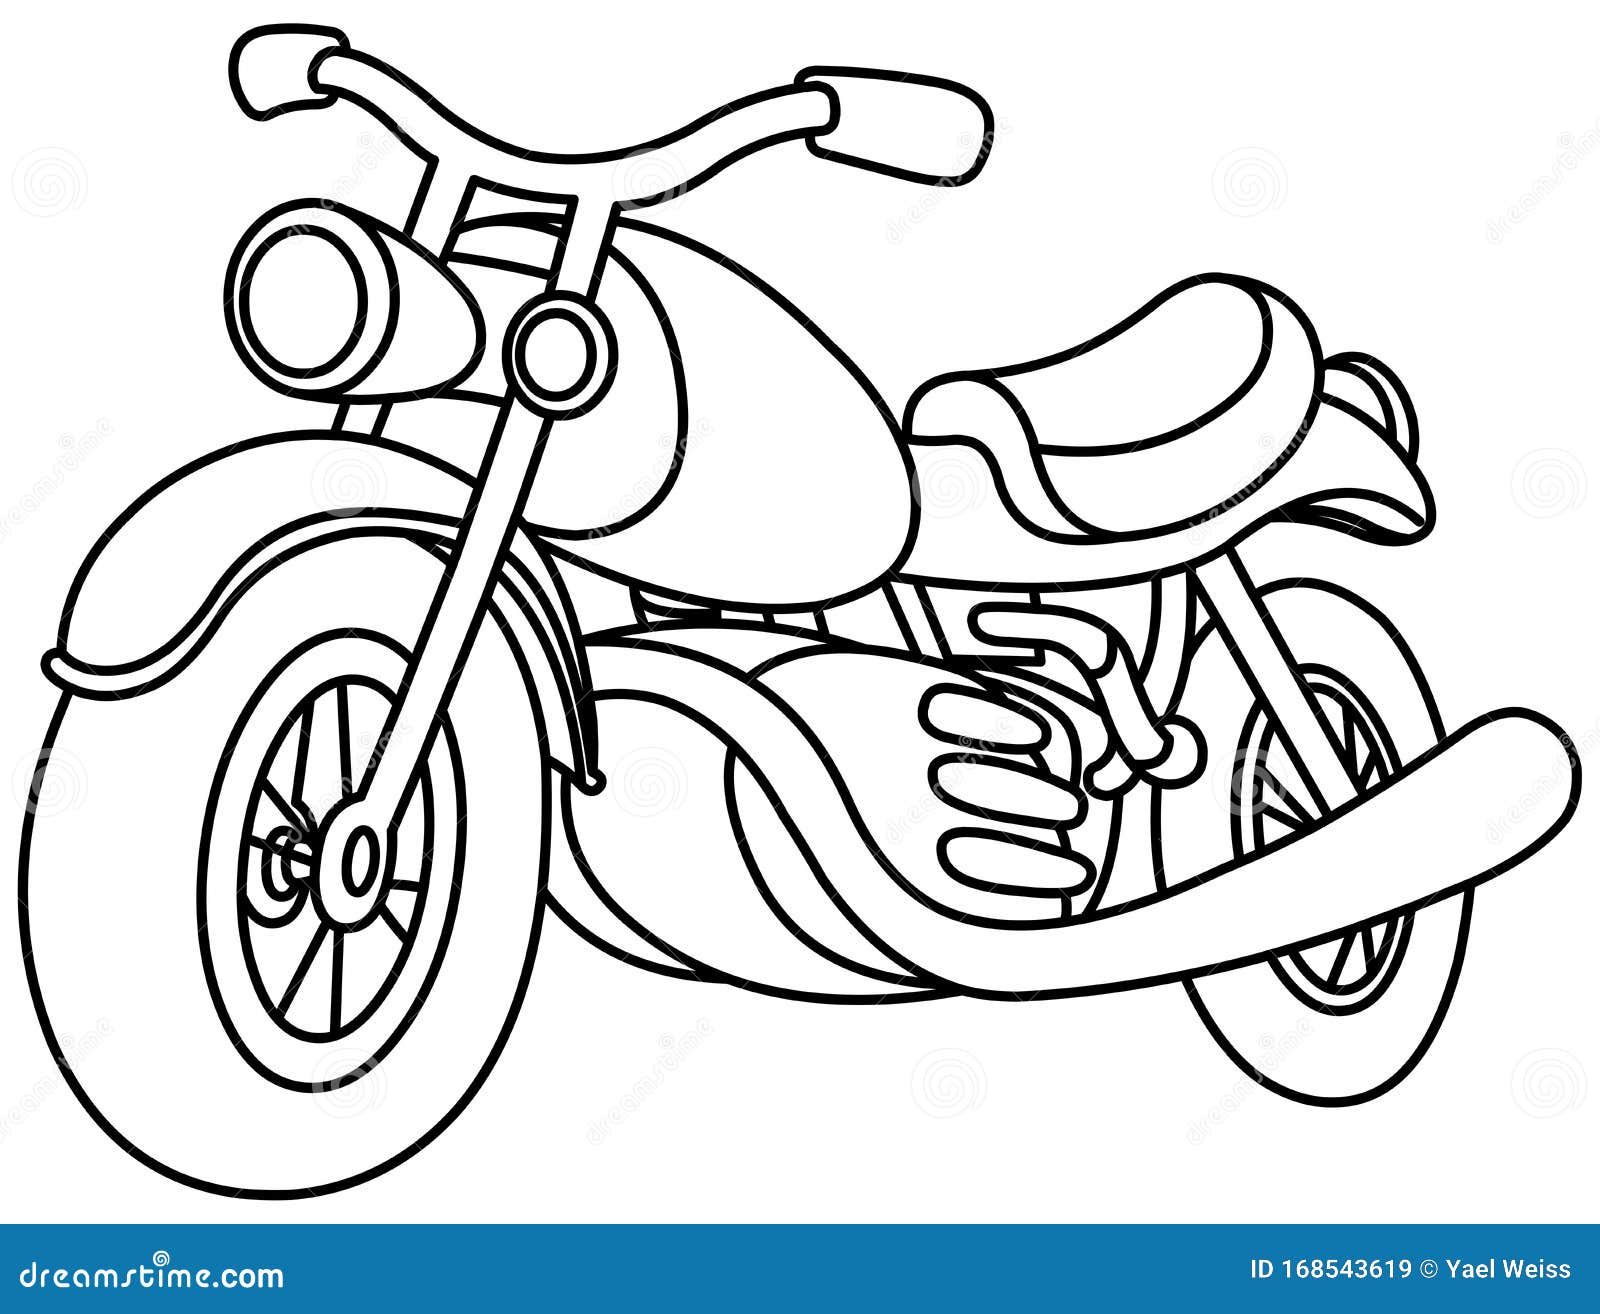 outlined motorcycle